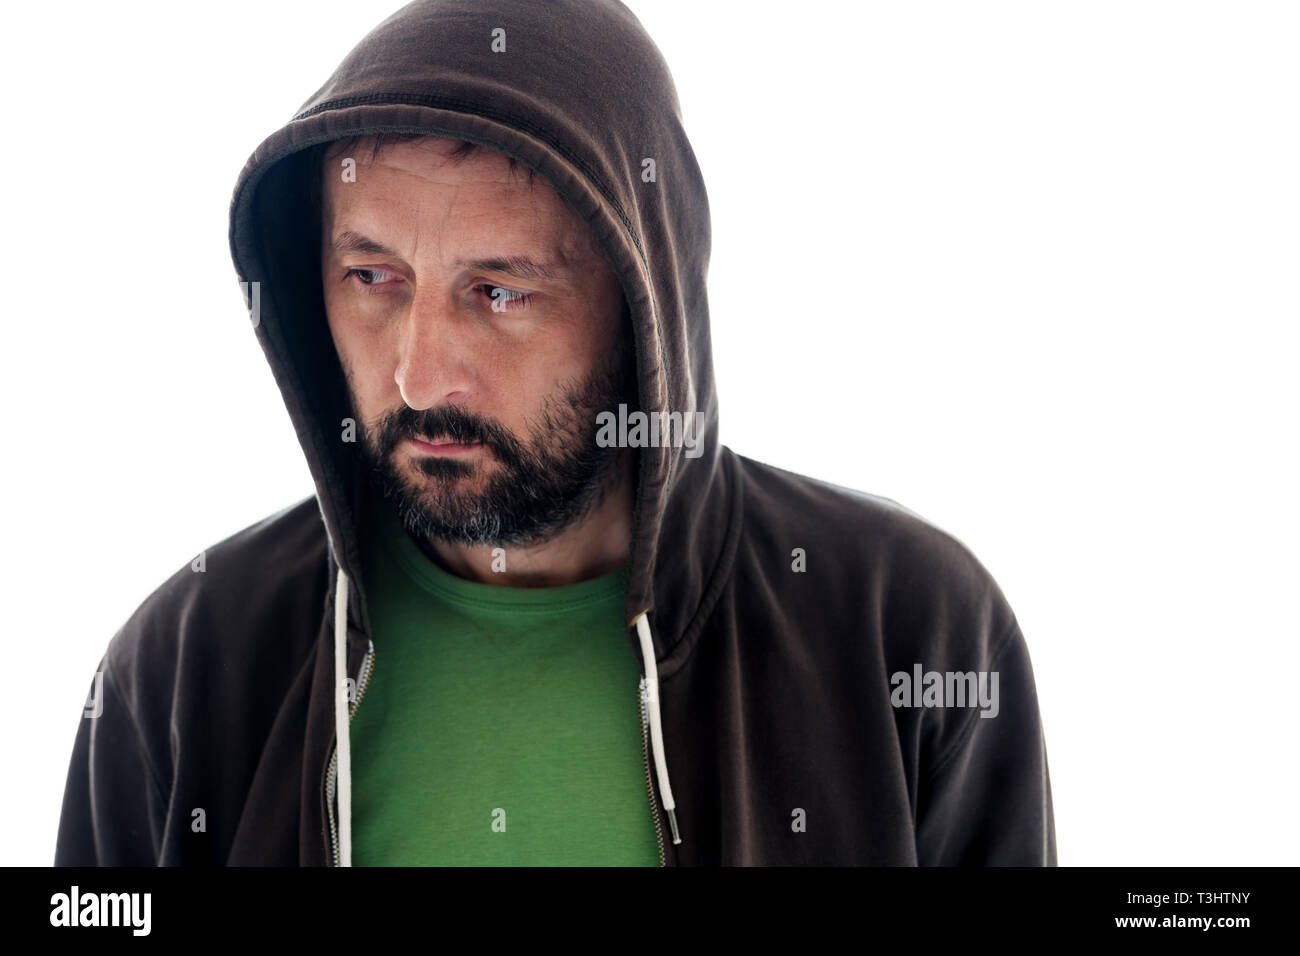 Disappointed man with hoodie isolated on white background looking down and to the side, avoiding eye contact Stock Photo